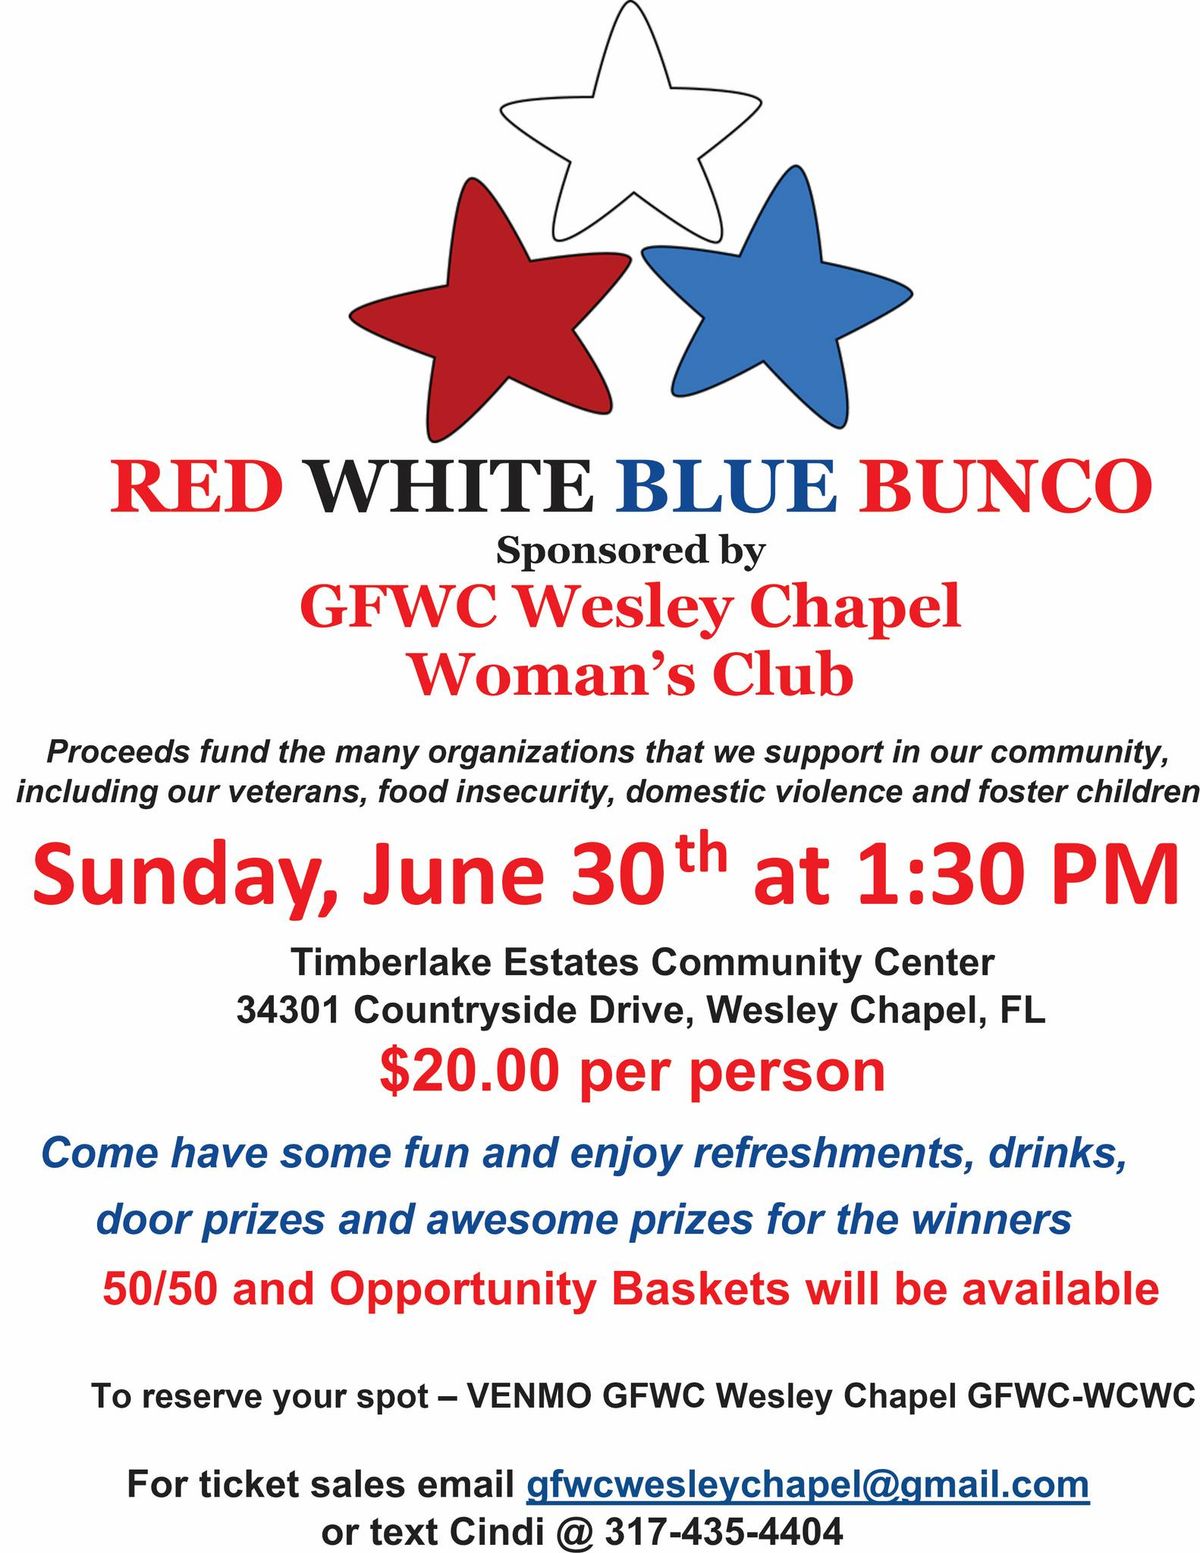 Red White and Blue Bunco 